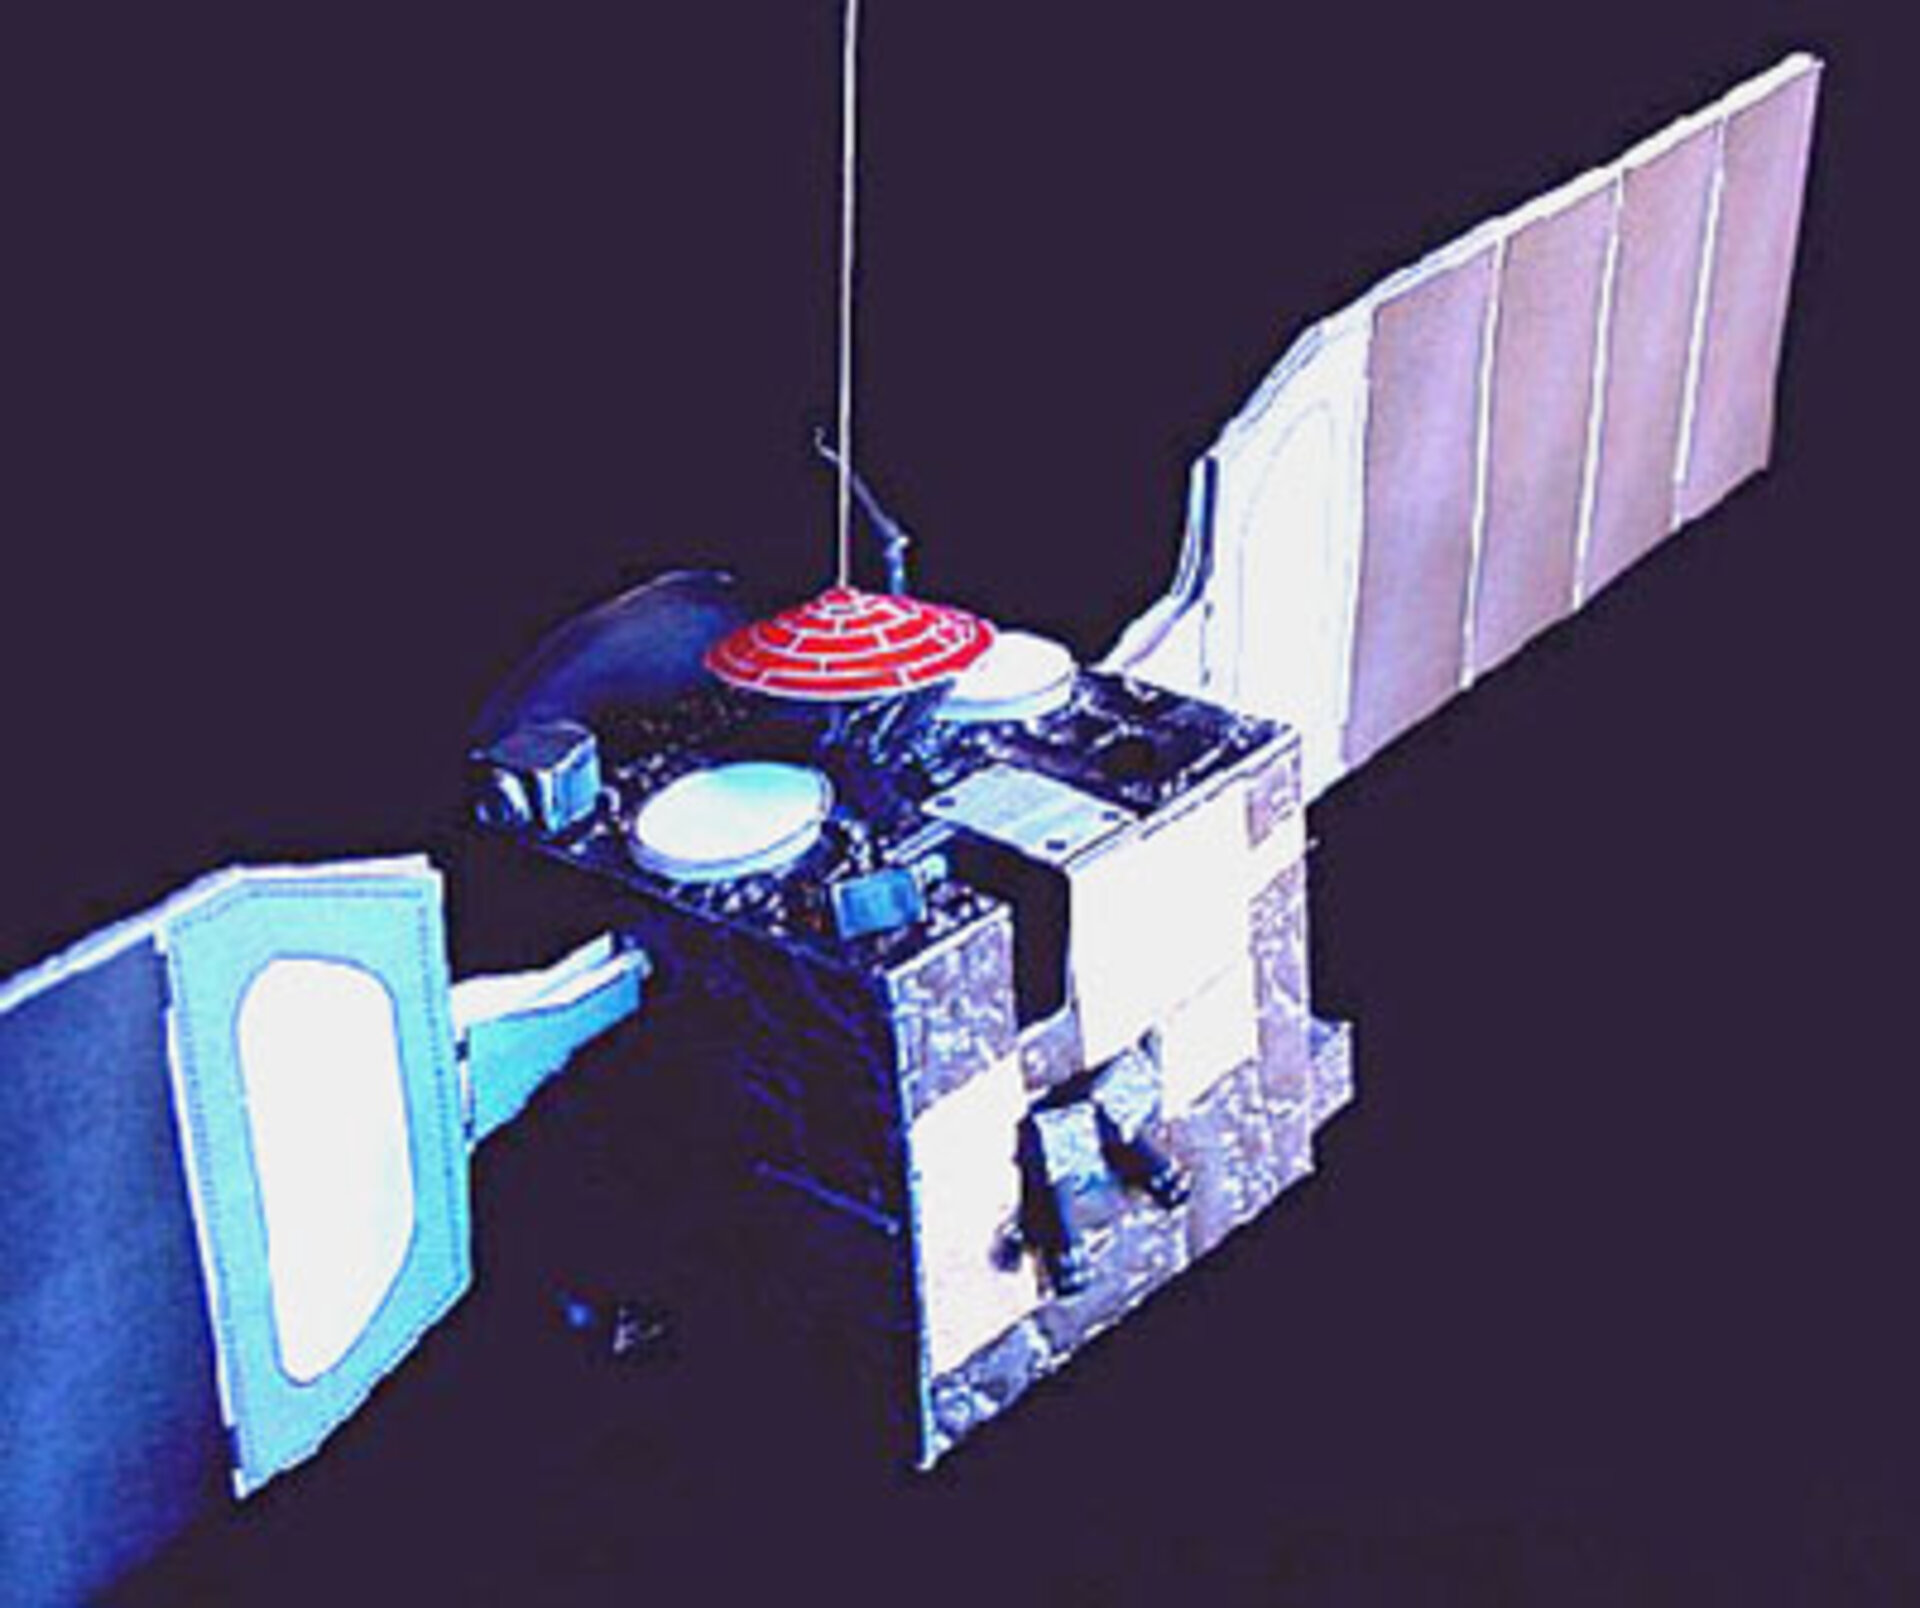 Mars Express scale model image